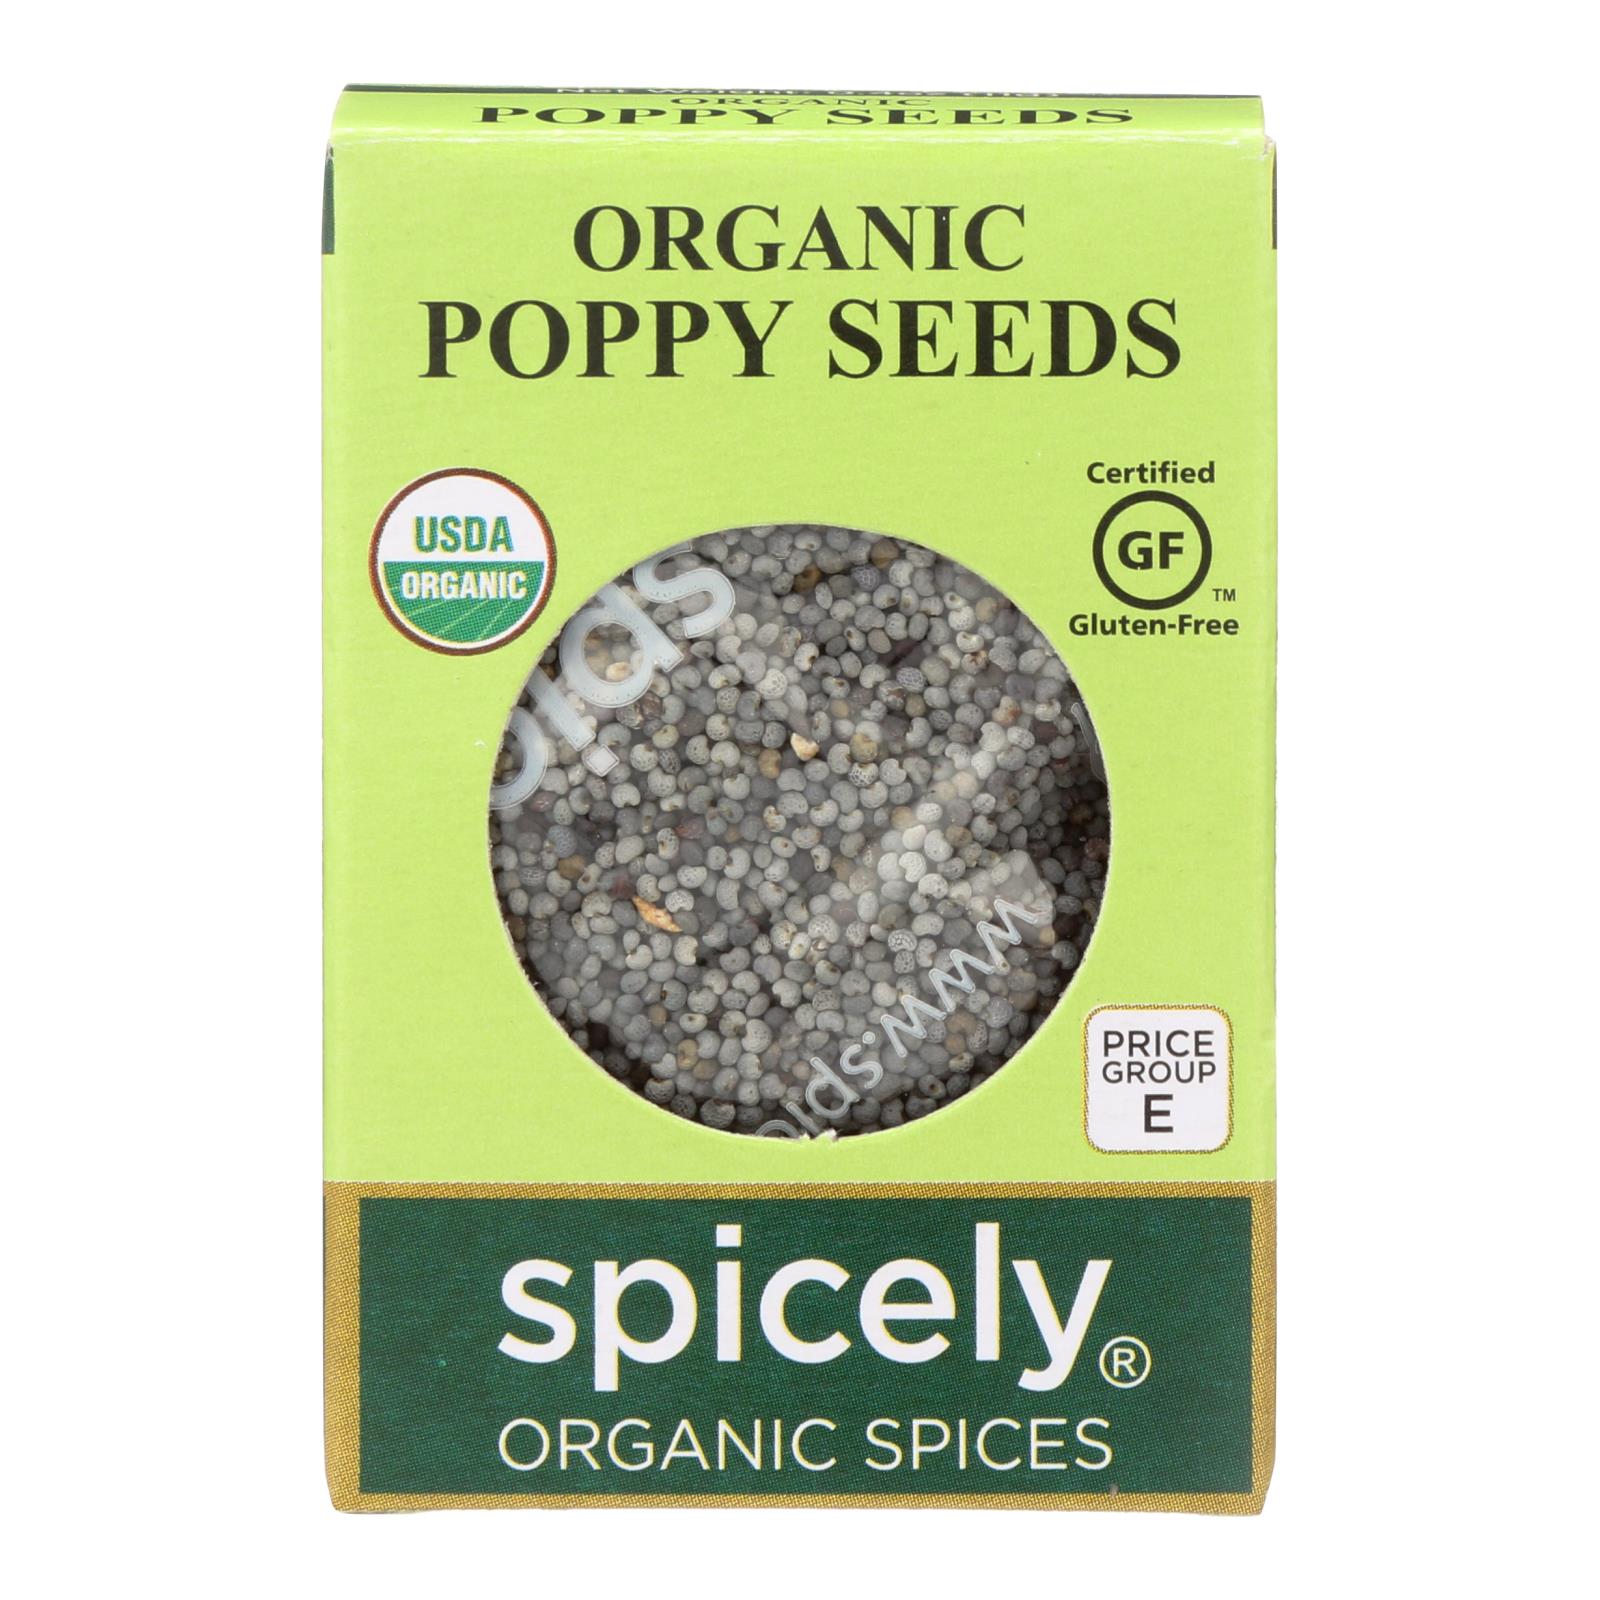 Spicely Organics - Organic Poppy Seeds - Case Of 6 - 0.4 Oz. - Whole Green Foods